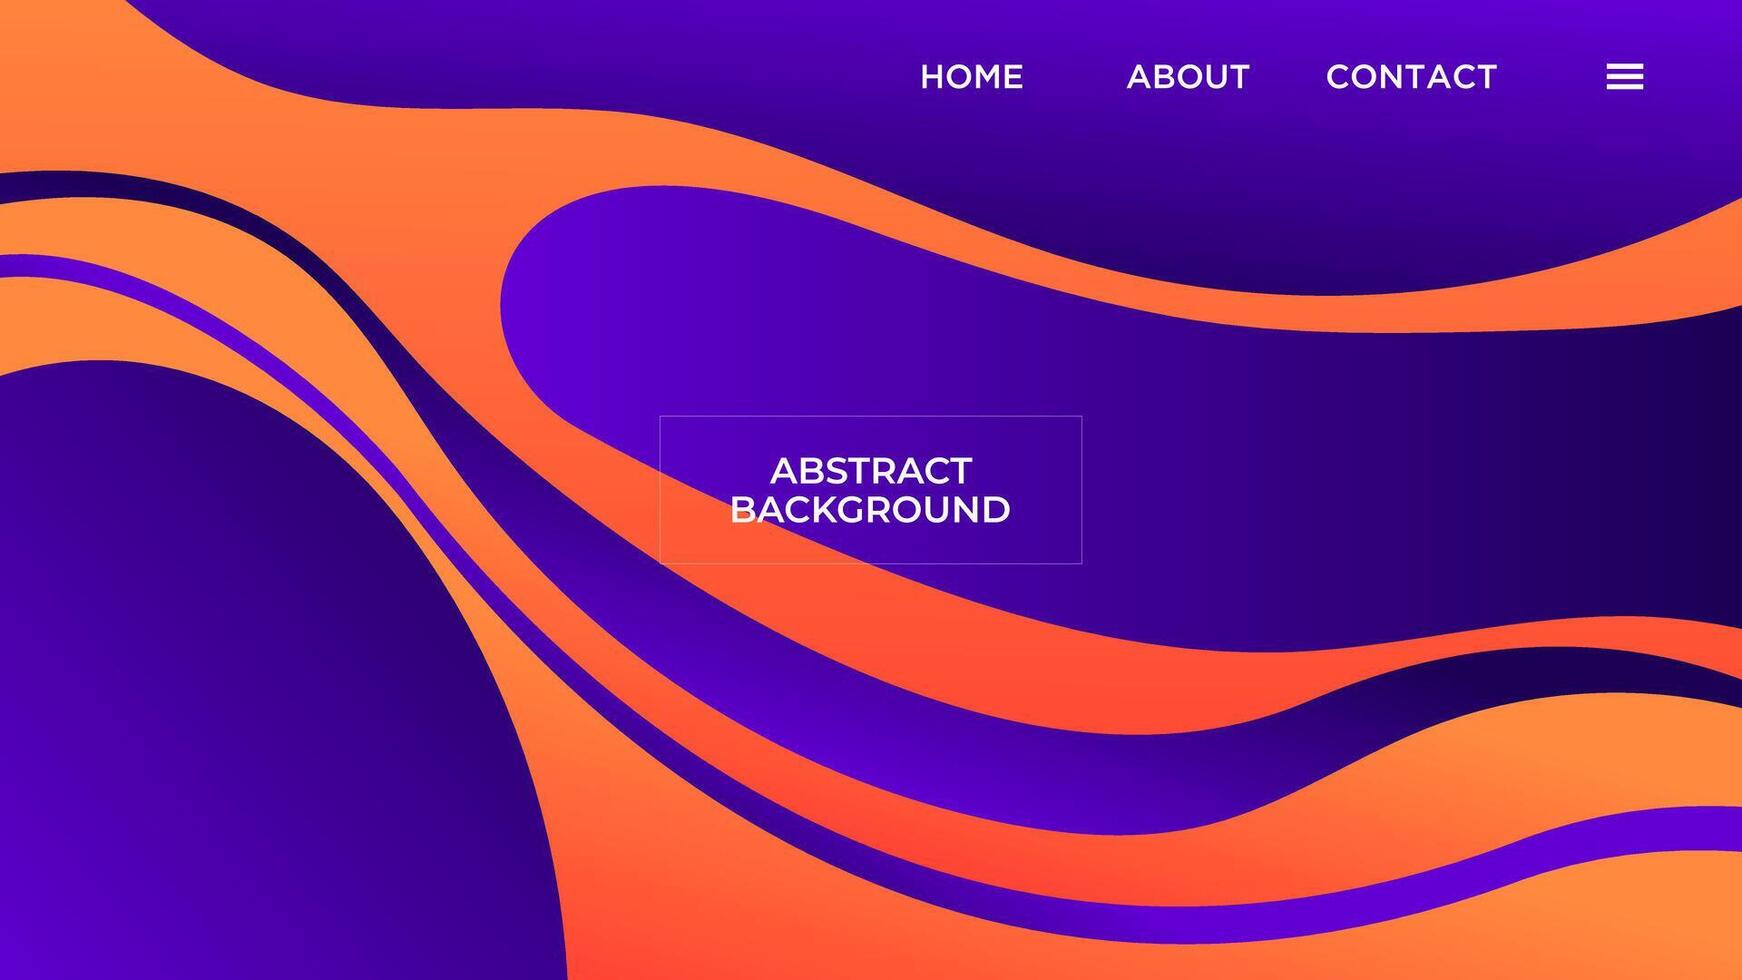 ABSTRACT BACKGROUND WITH GEOMETRIC SHAPES GRADIENT PURPLE ORANGE SMOOTH LIQUID COLOR DESIGN VECTOR TEMPLATE GOOD FOR MODERN WEBSITE, WALLPAPER, COVER DESIGN